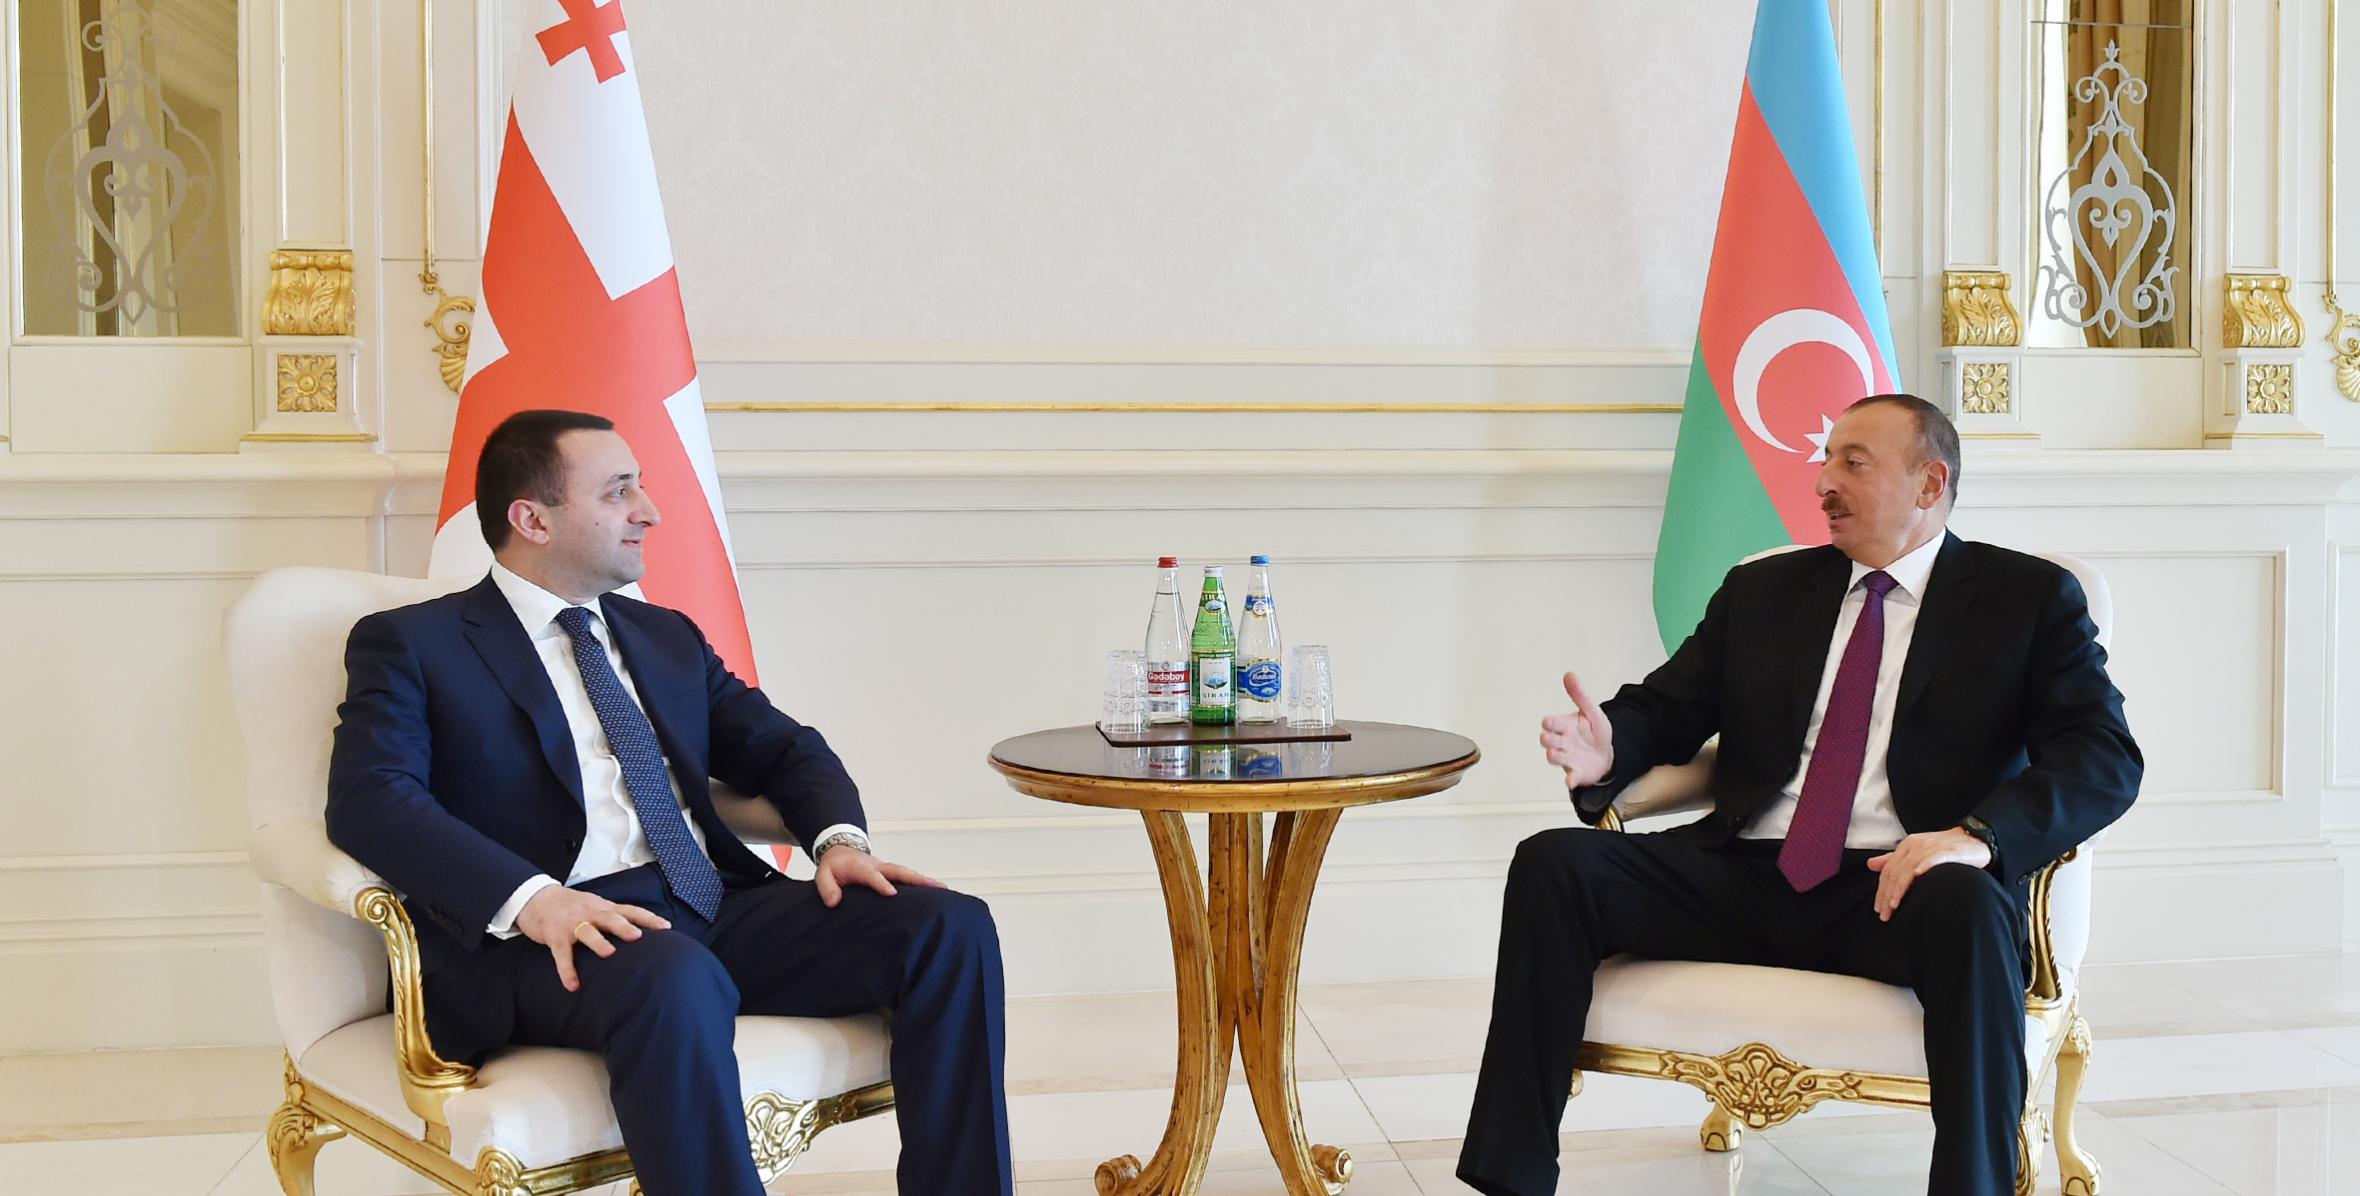 Ilham Aliyev received the Prime Minister of Georgia